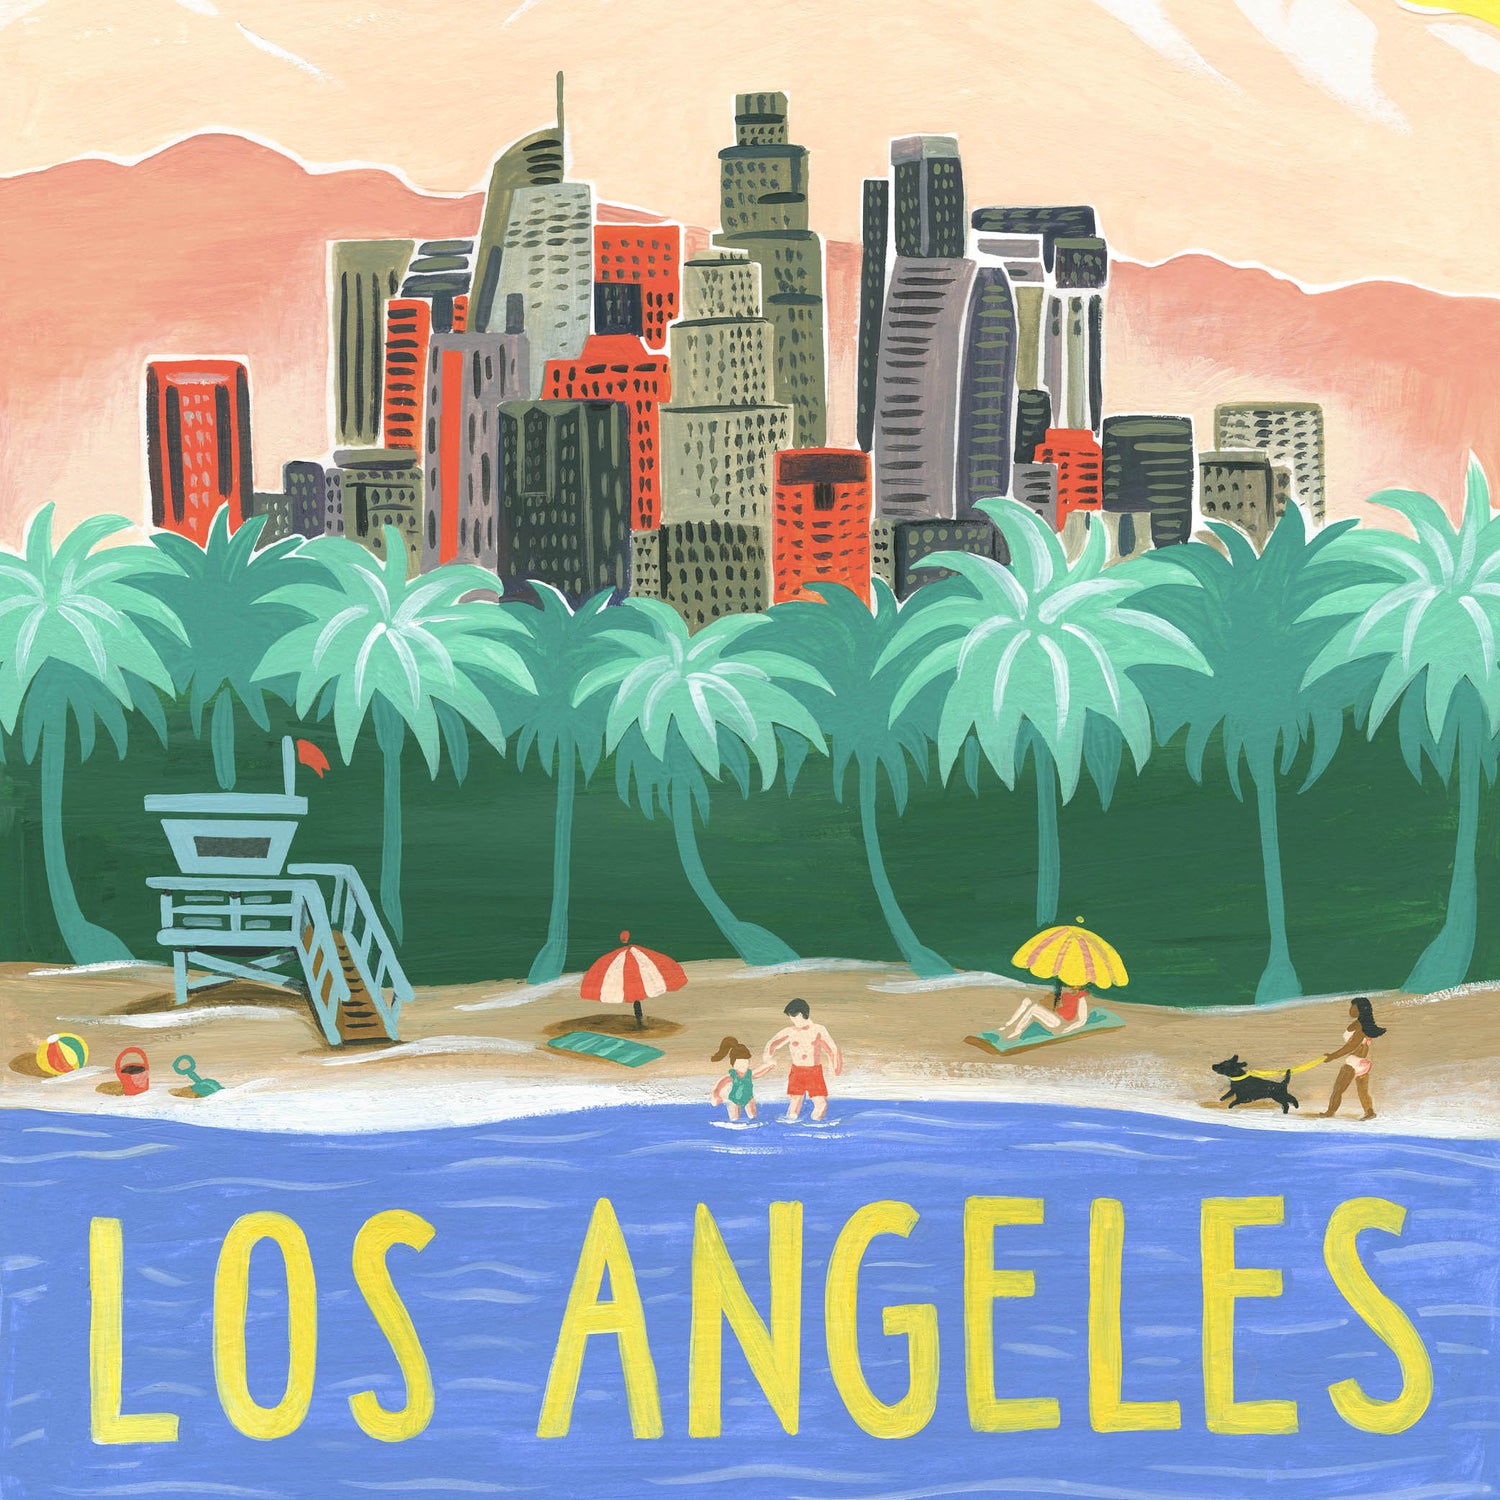 Los Angeles beach art detail with LA skyline and Hollywood Hills; illustration by Angela Staehling